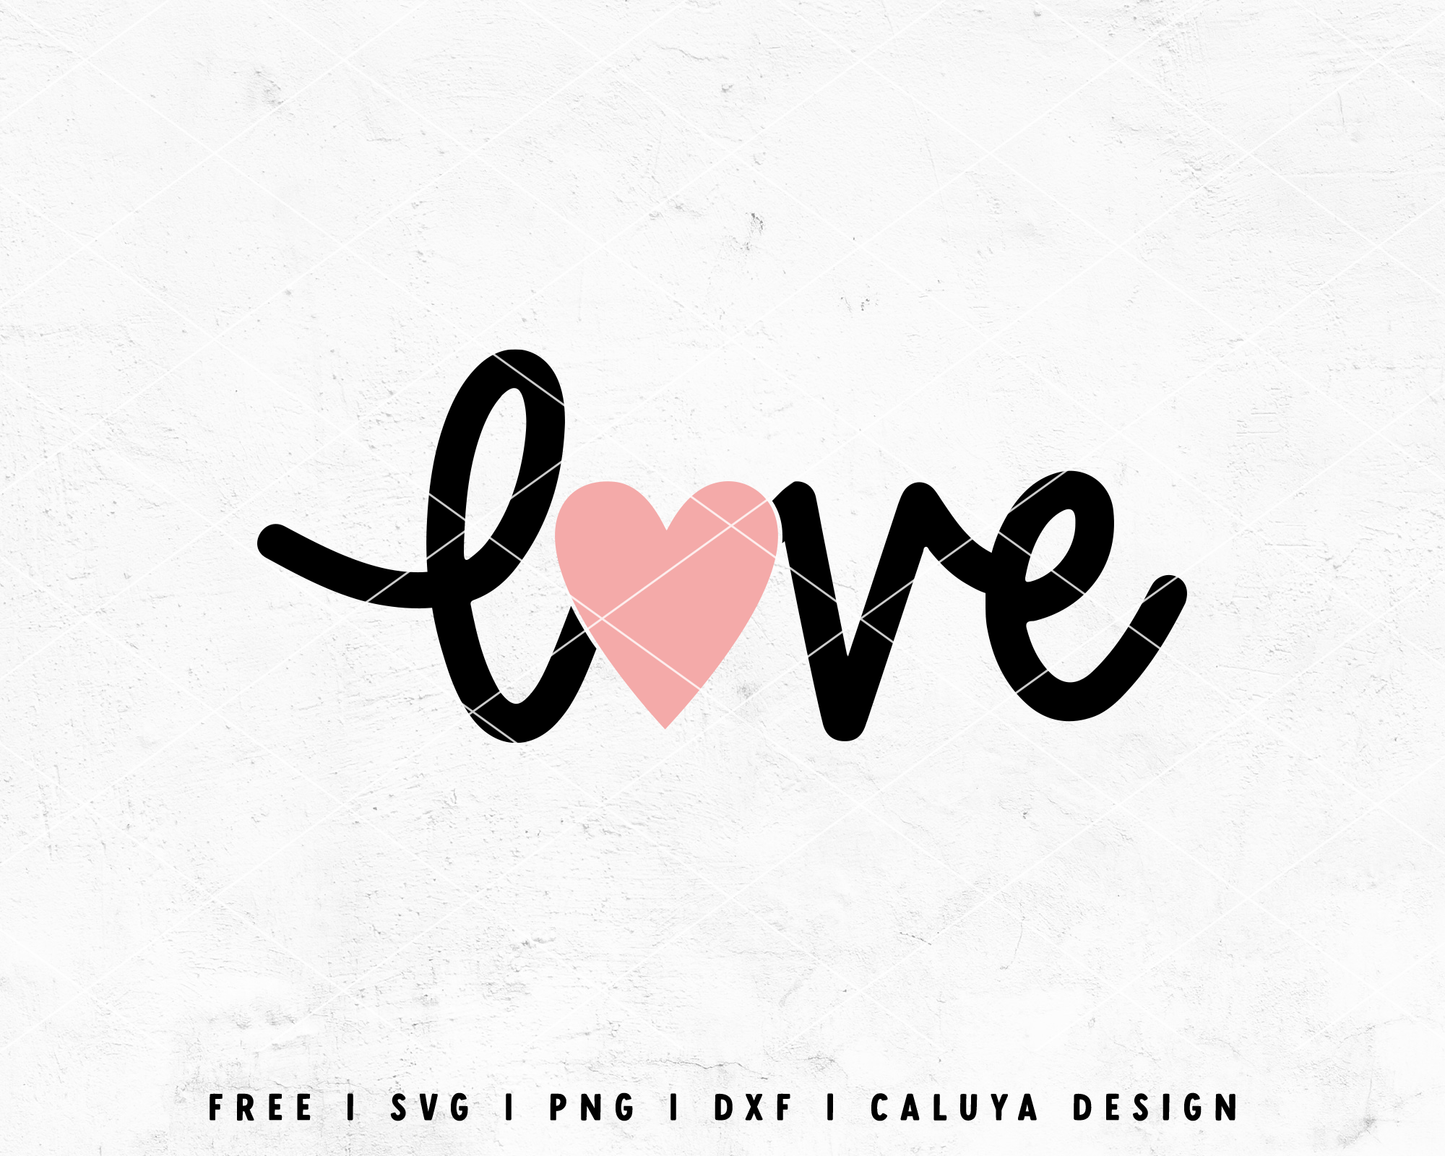 FREE Love SVG | Valentines Day SVG | Heart Love SVG Cut File for Cricut, Cameo Silhouette | Free SVG Cut File